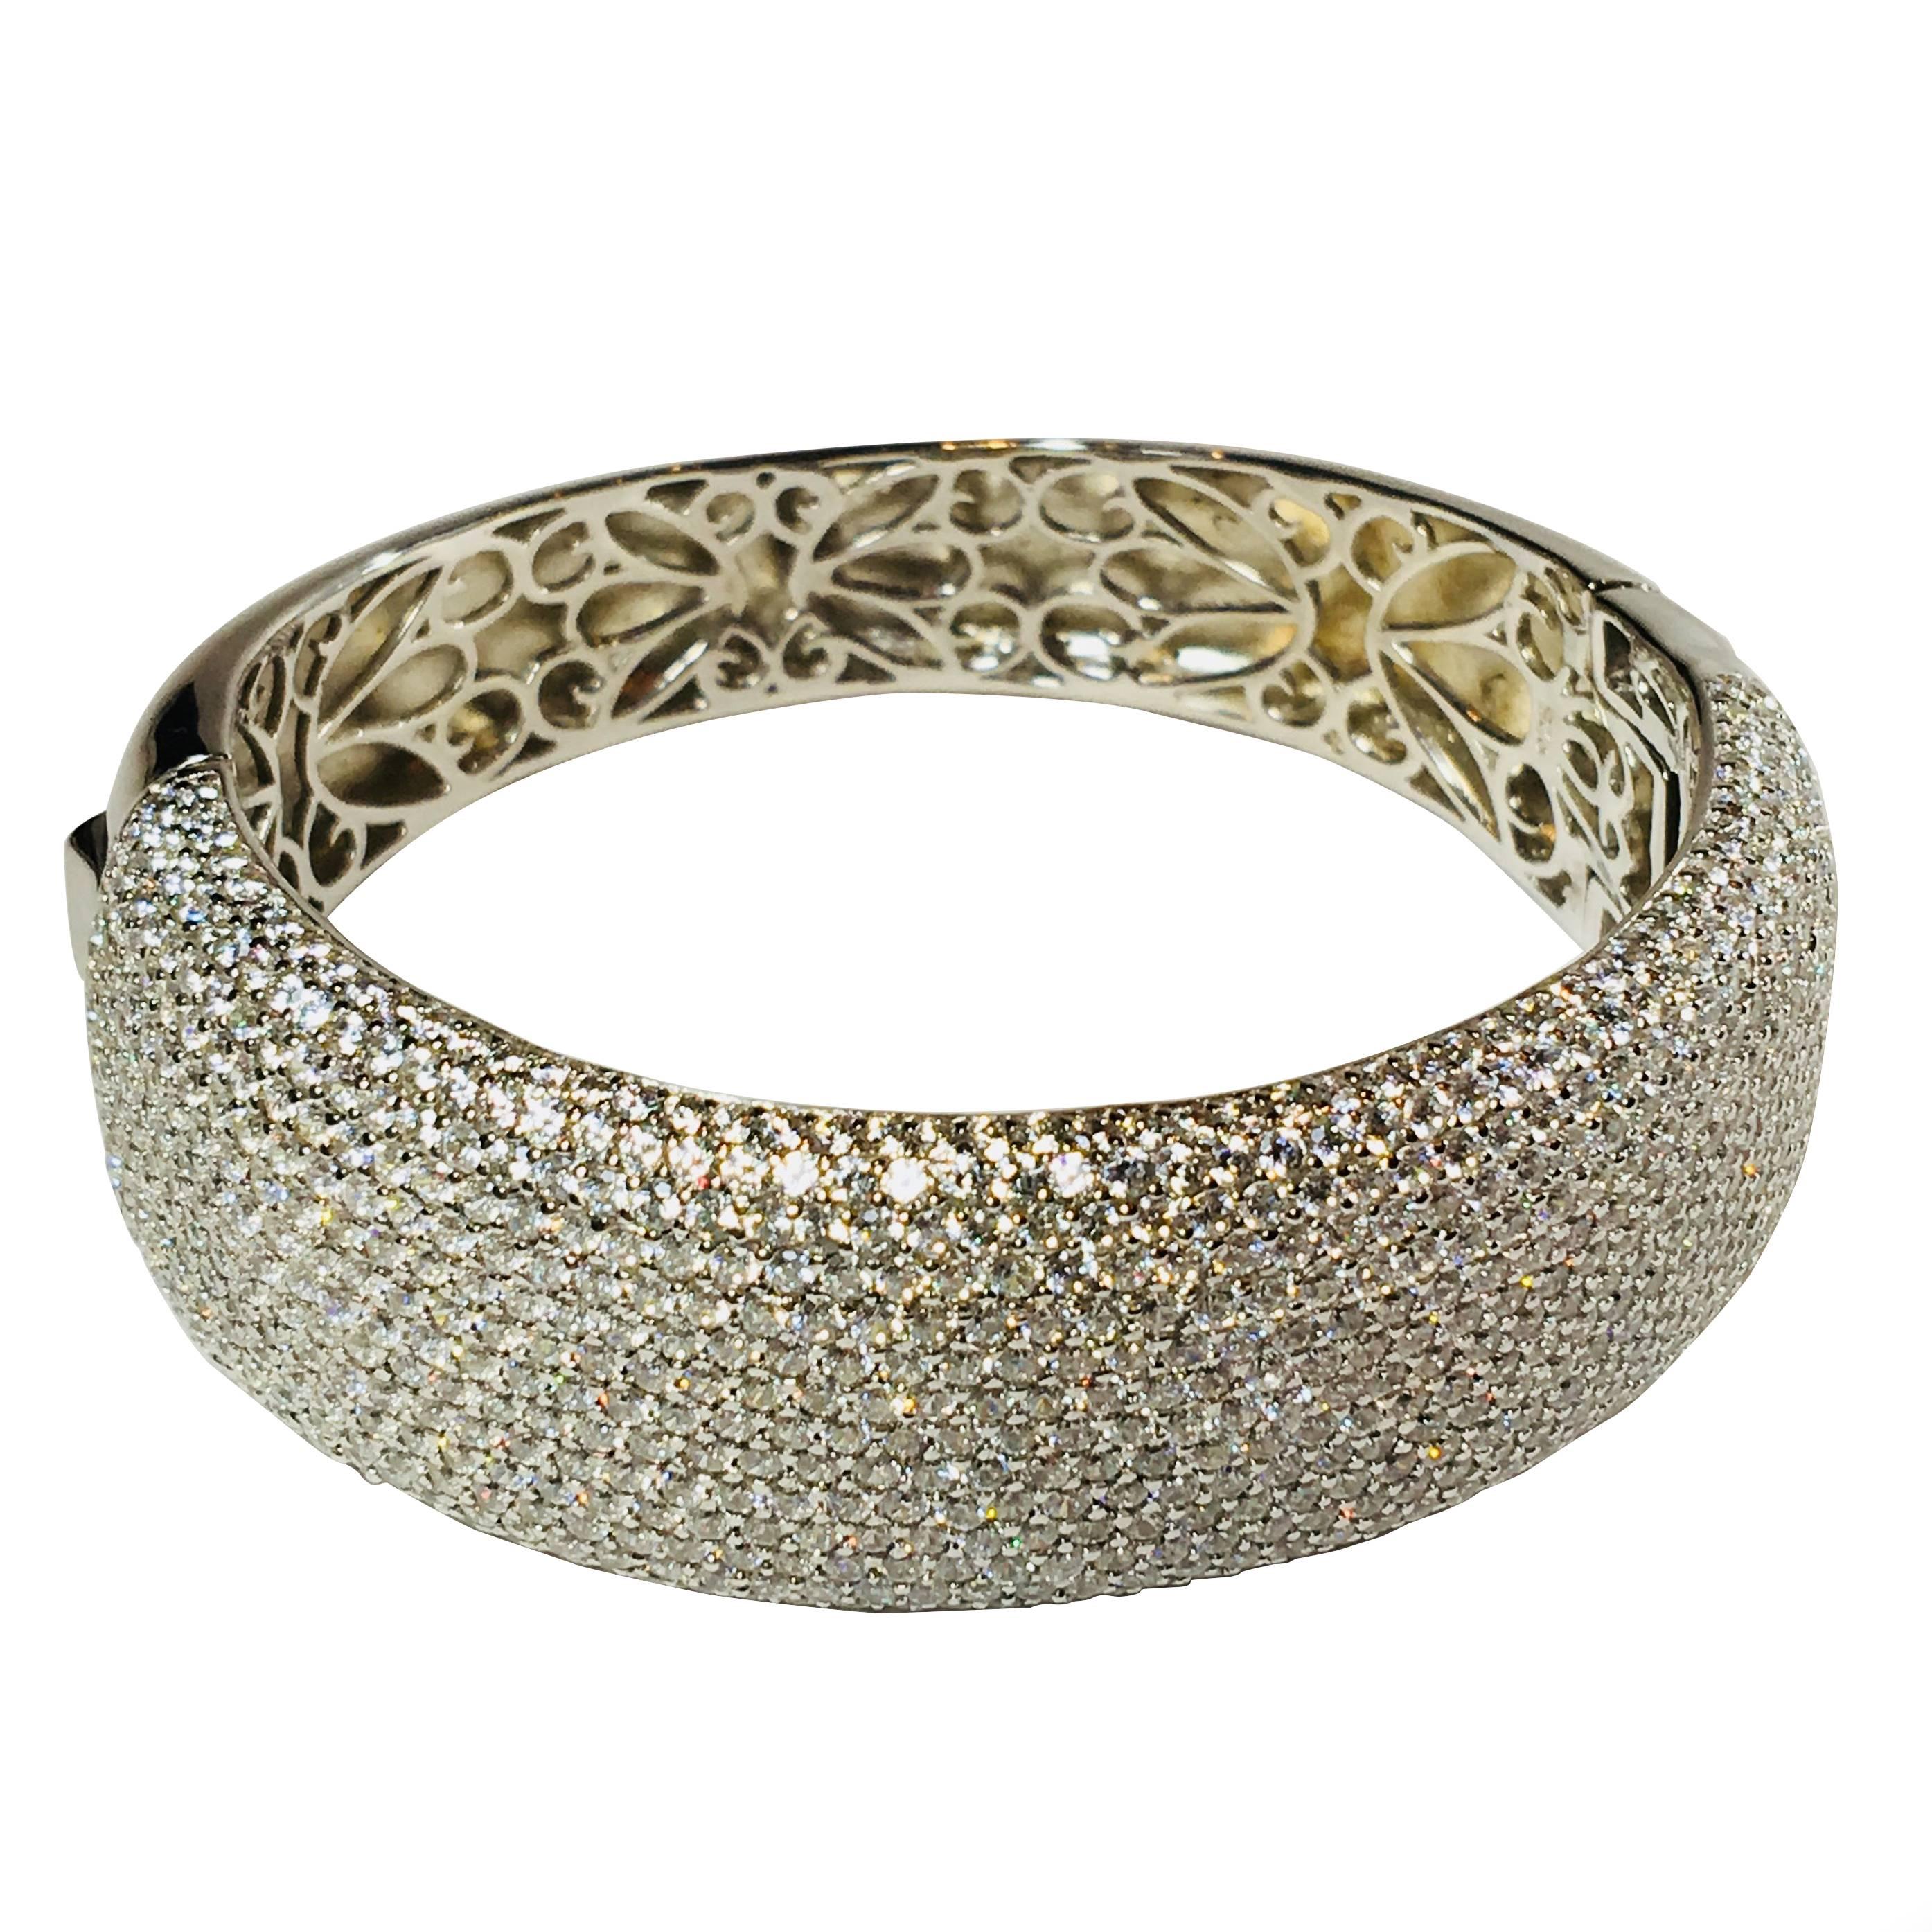 Multi Row Pave Wide Hinged Cuff